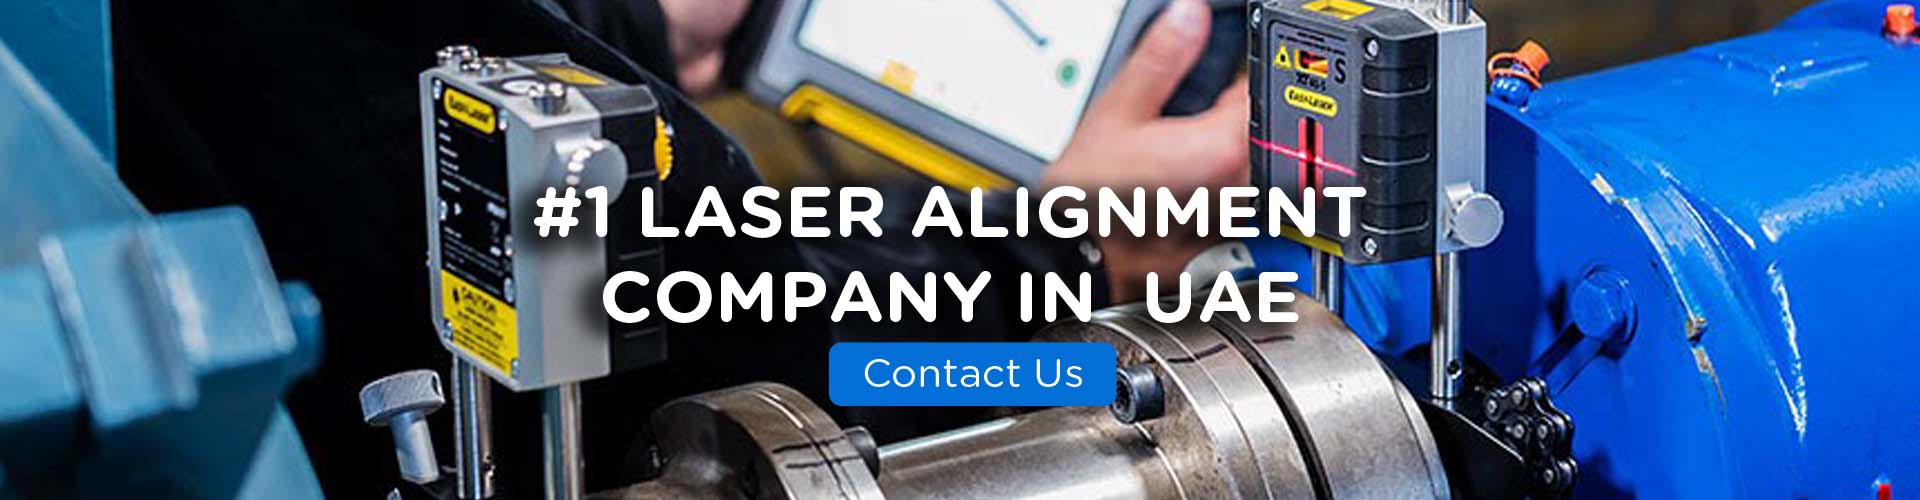 Laser alignment services